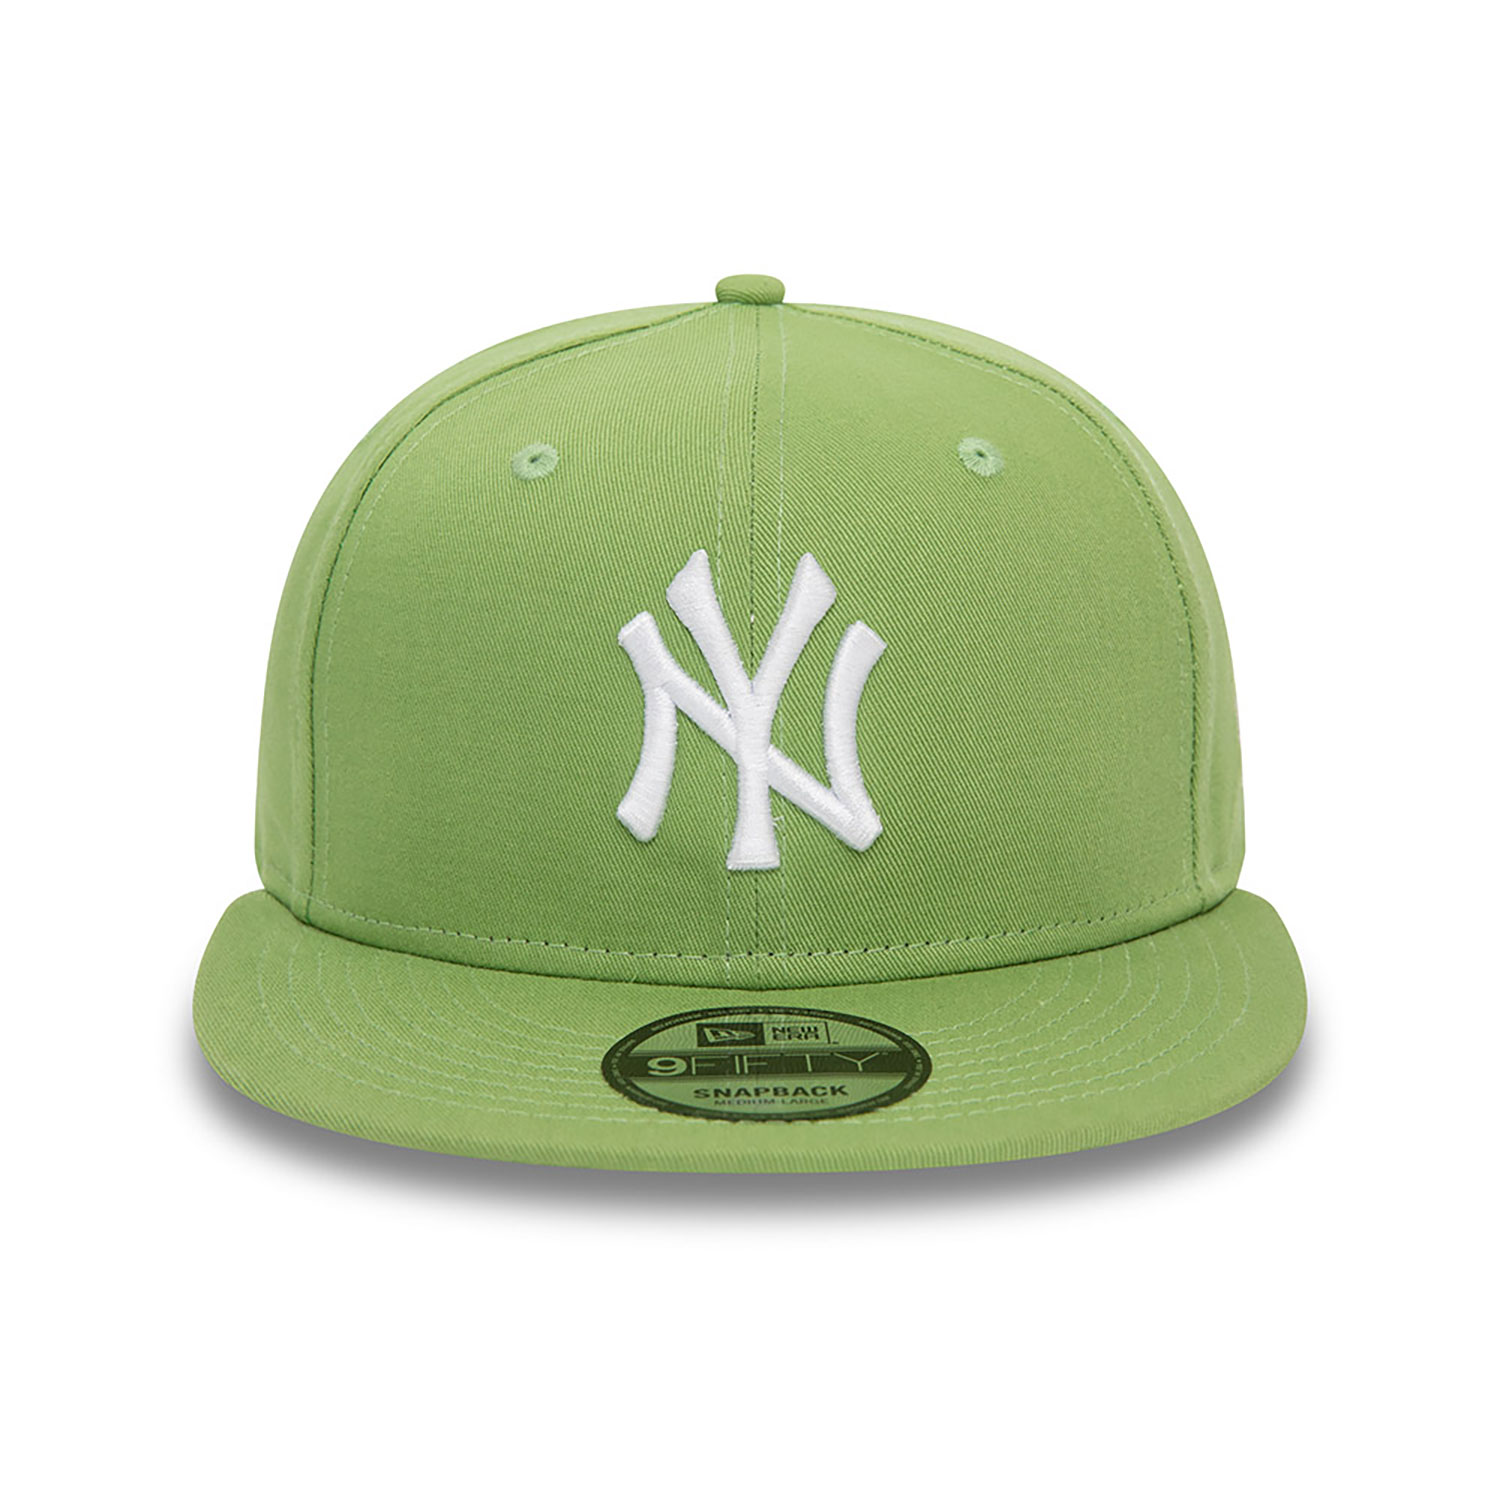 New York Yankees League Essential Green 9FIFTY Adjustable Cap